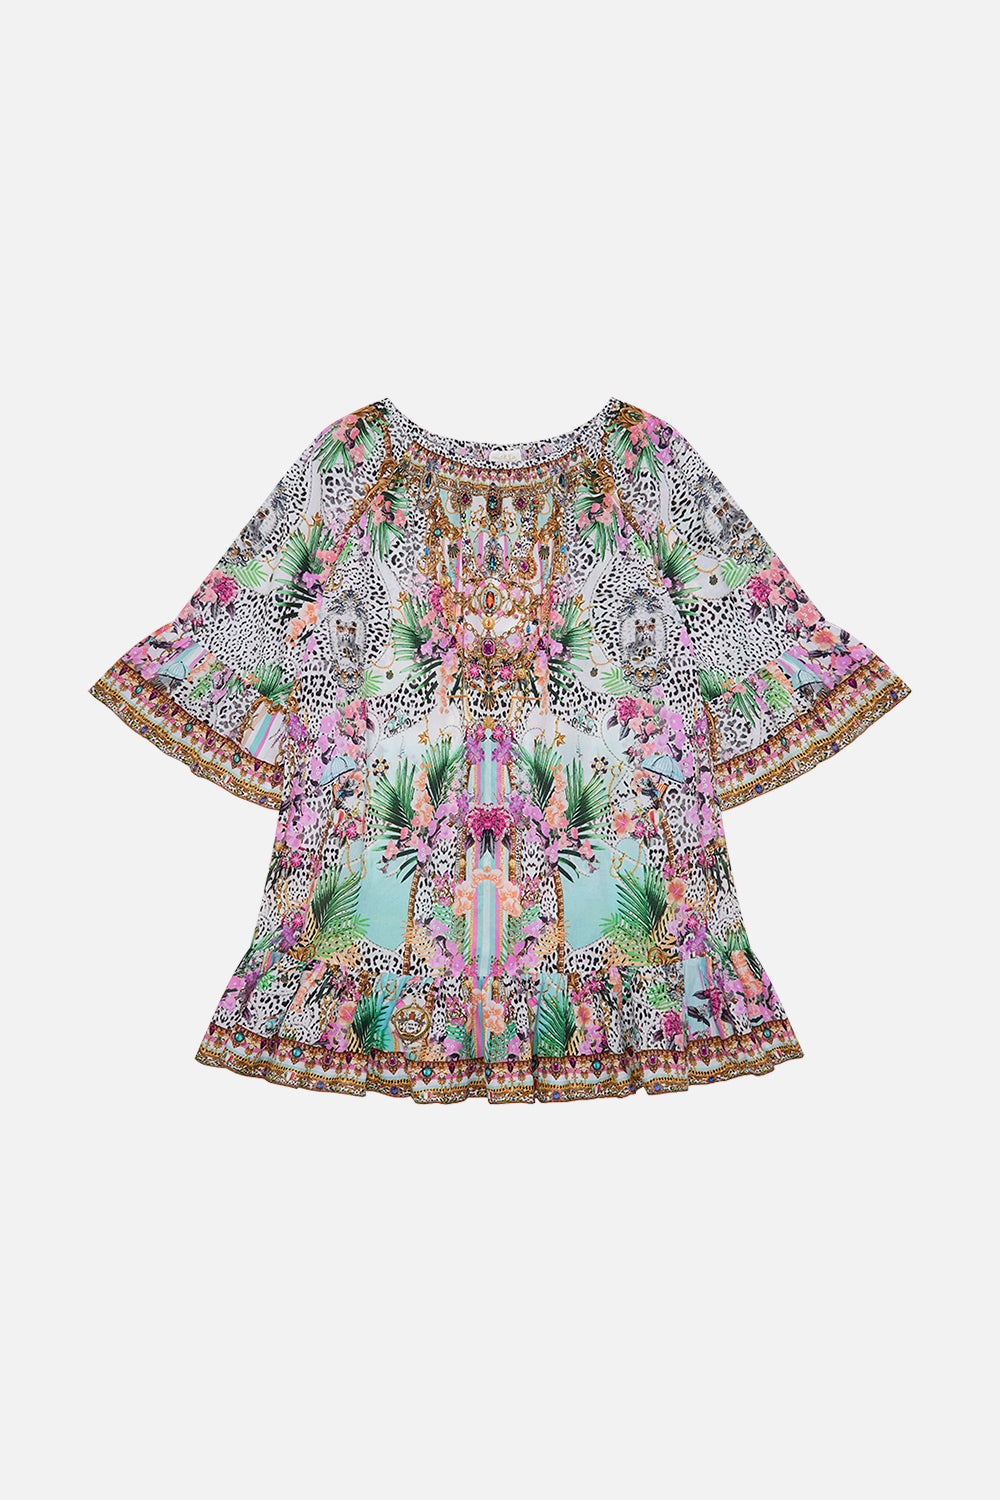 Product view of MILLA BY CAMILLA kids frill dress in Dear Amore Mio print